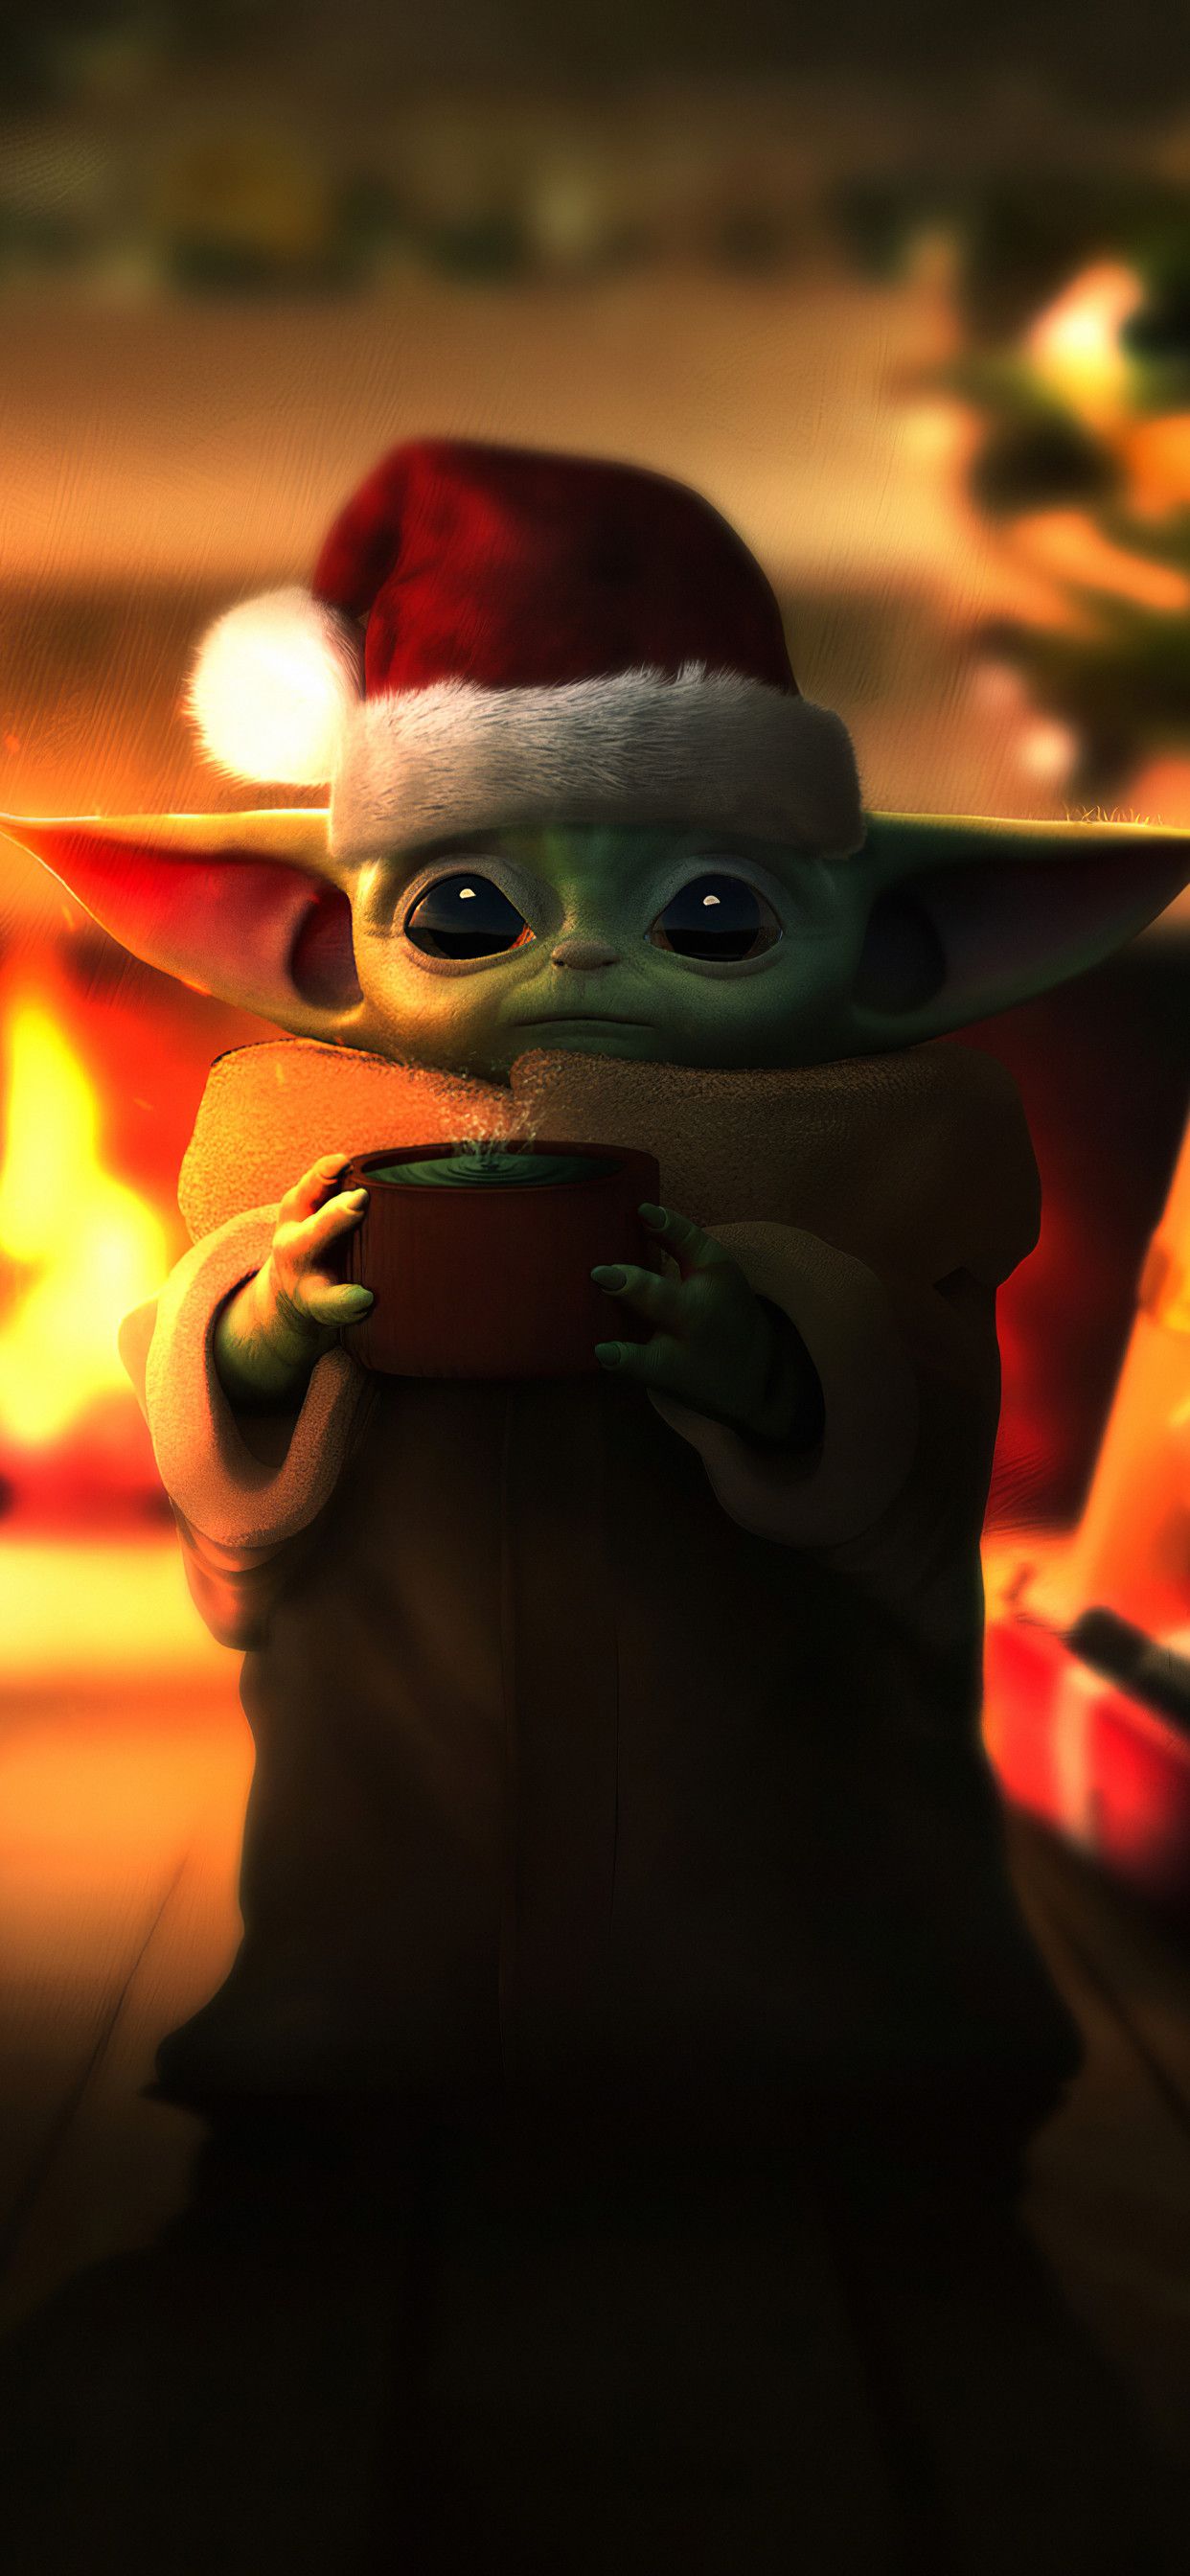 Wallpapers 4K Yoda / Baby Yoda Star Wars With Background Of Sun And ... Yoda Wallpaper Iphone